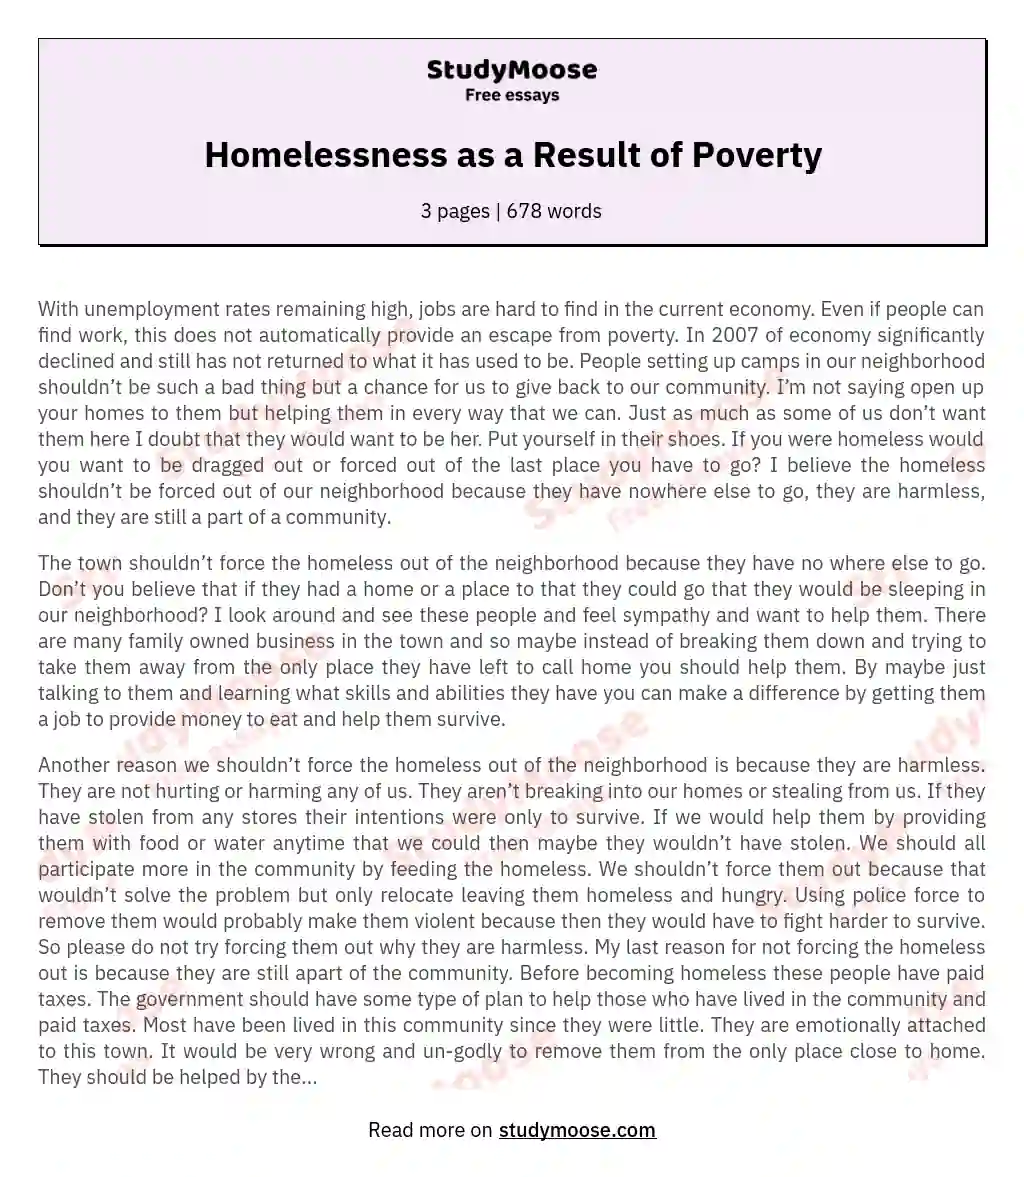 Homelessness as a Result of Poverty essay